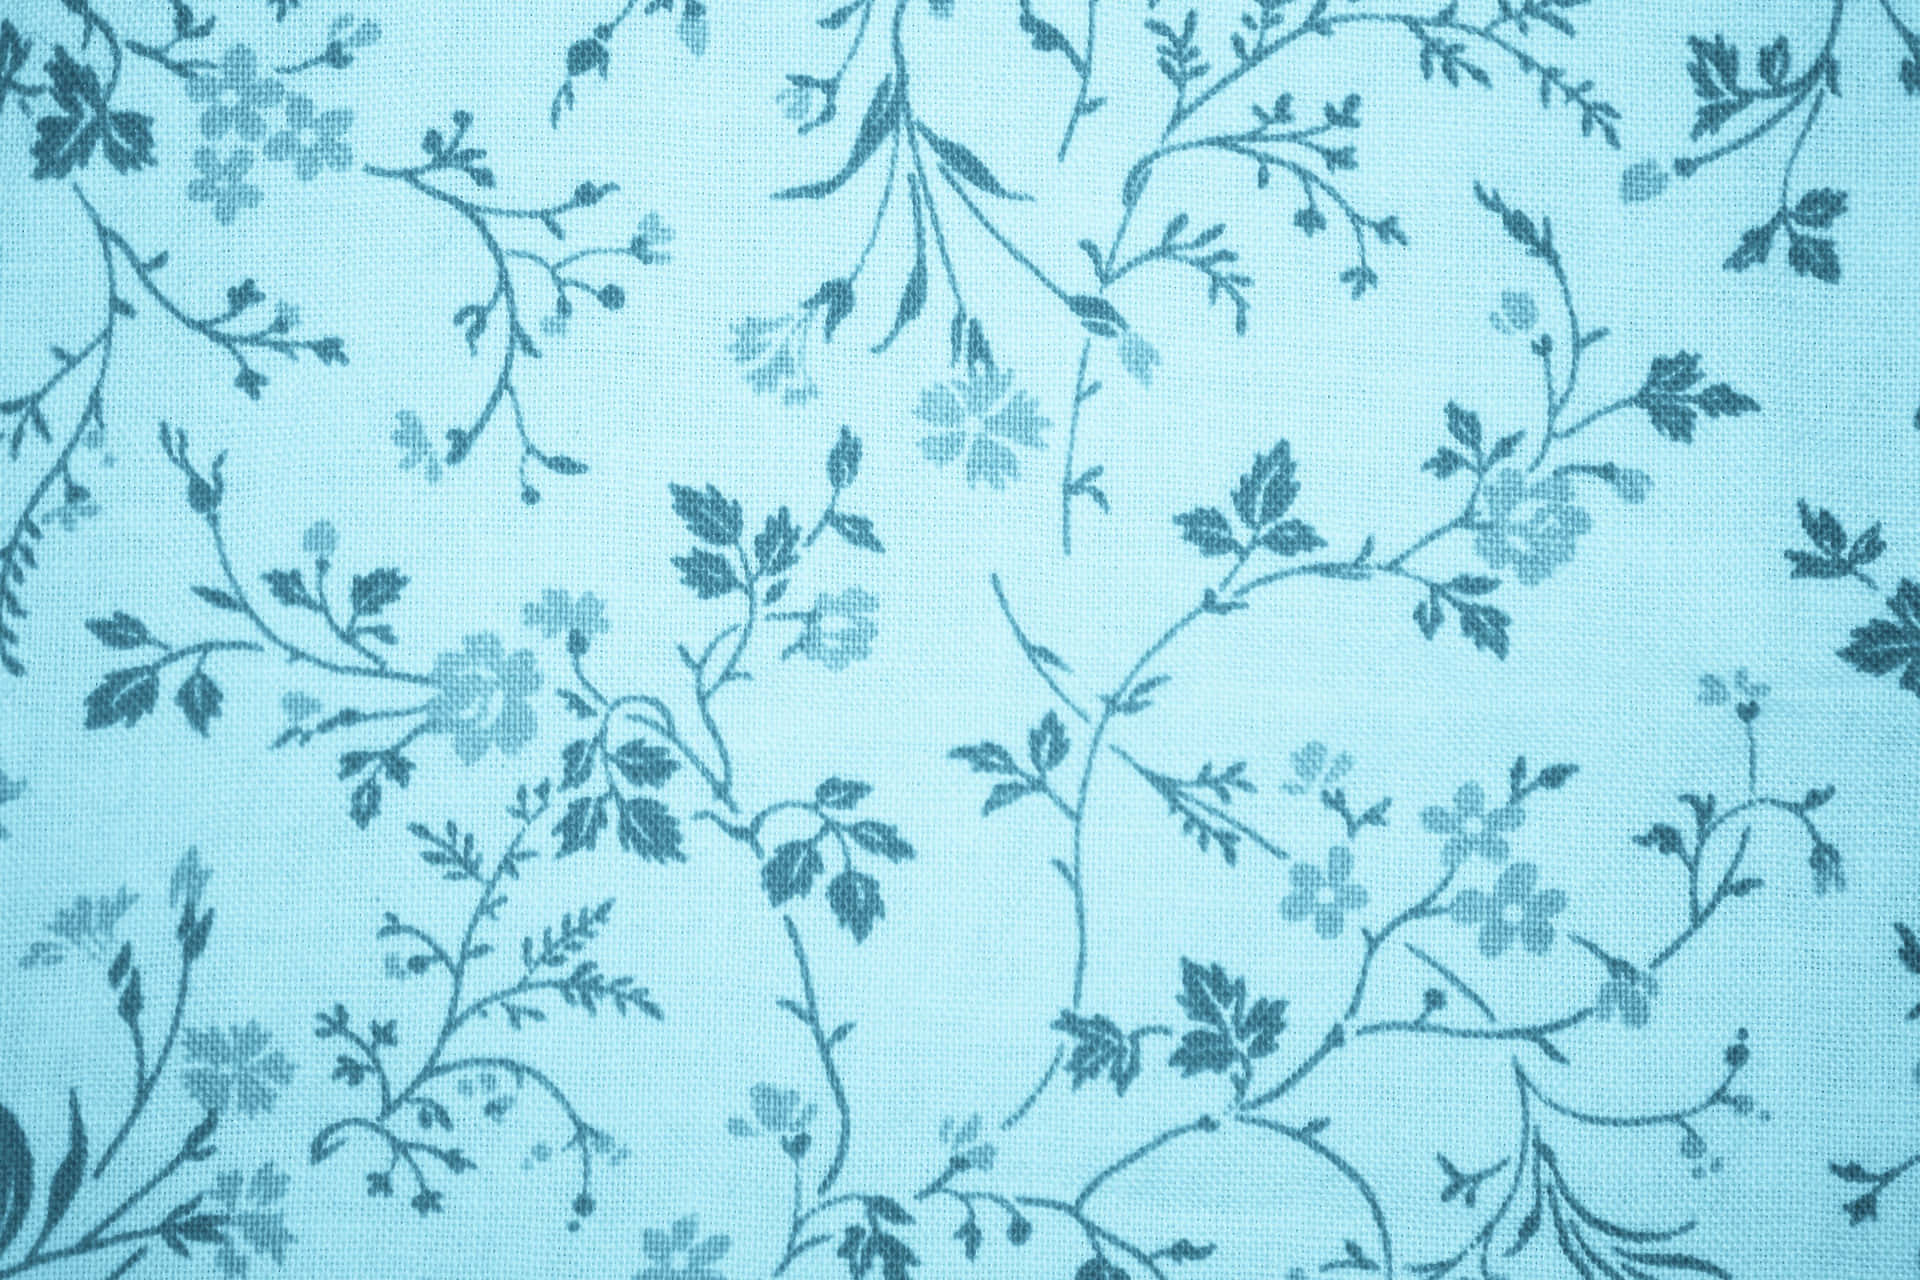 Experience the joy of a blissful summer with this cheerful blue floral background.